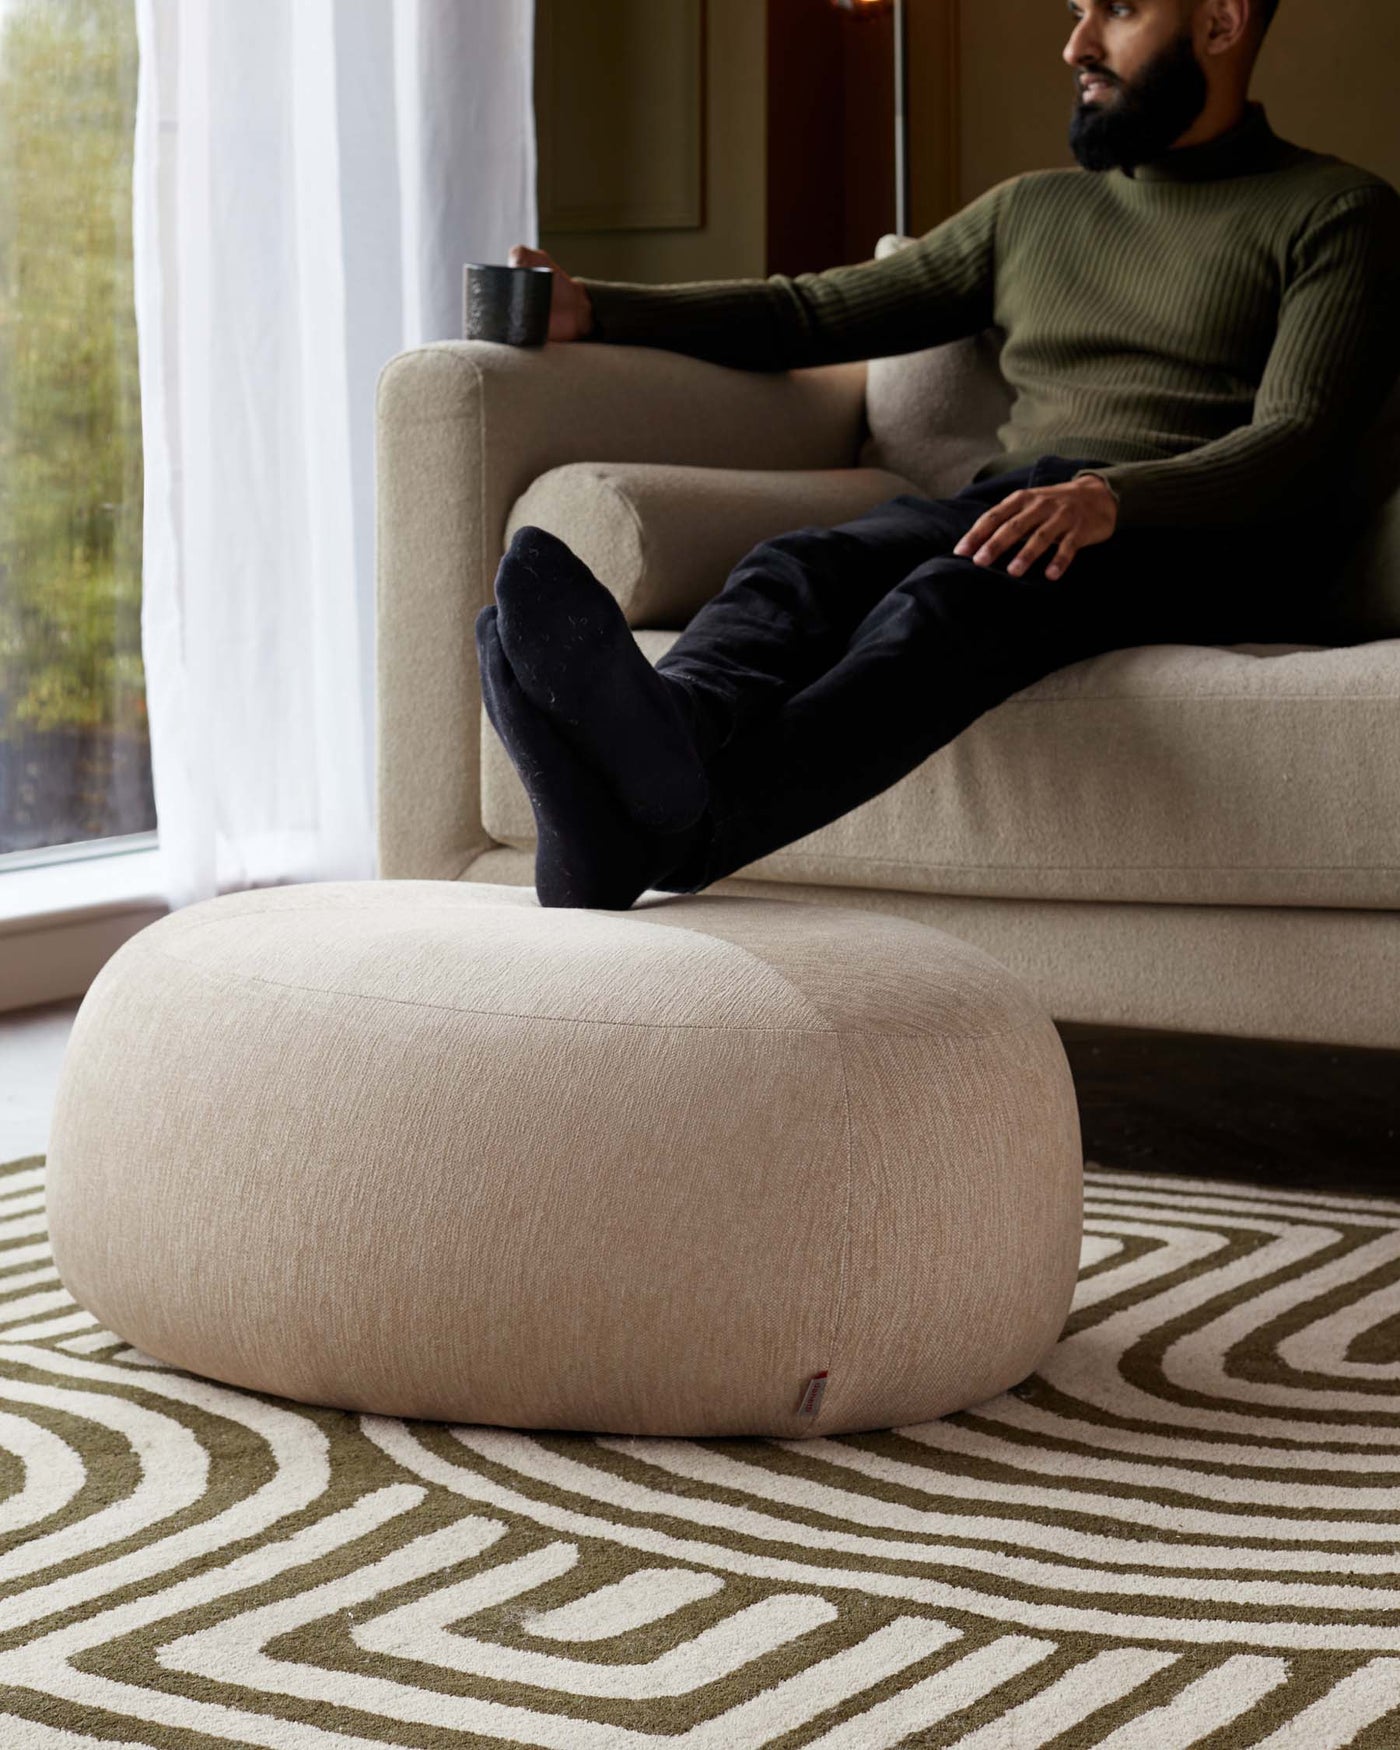 A contemporary beige fabric sofa with a clean, minimalist design, complemented by a coordinating round beige fabric ottoman, set against a geometric patterned rug in earth tones.